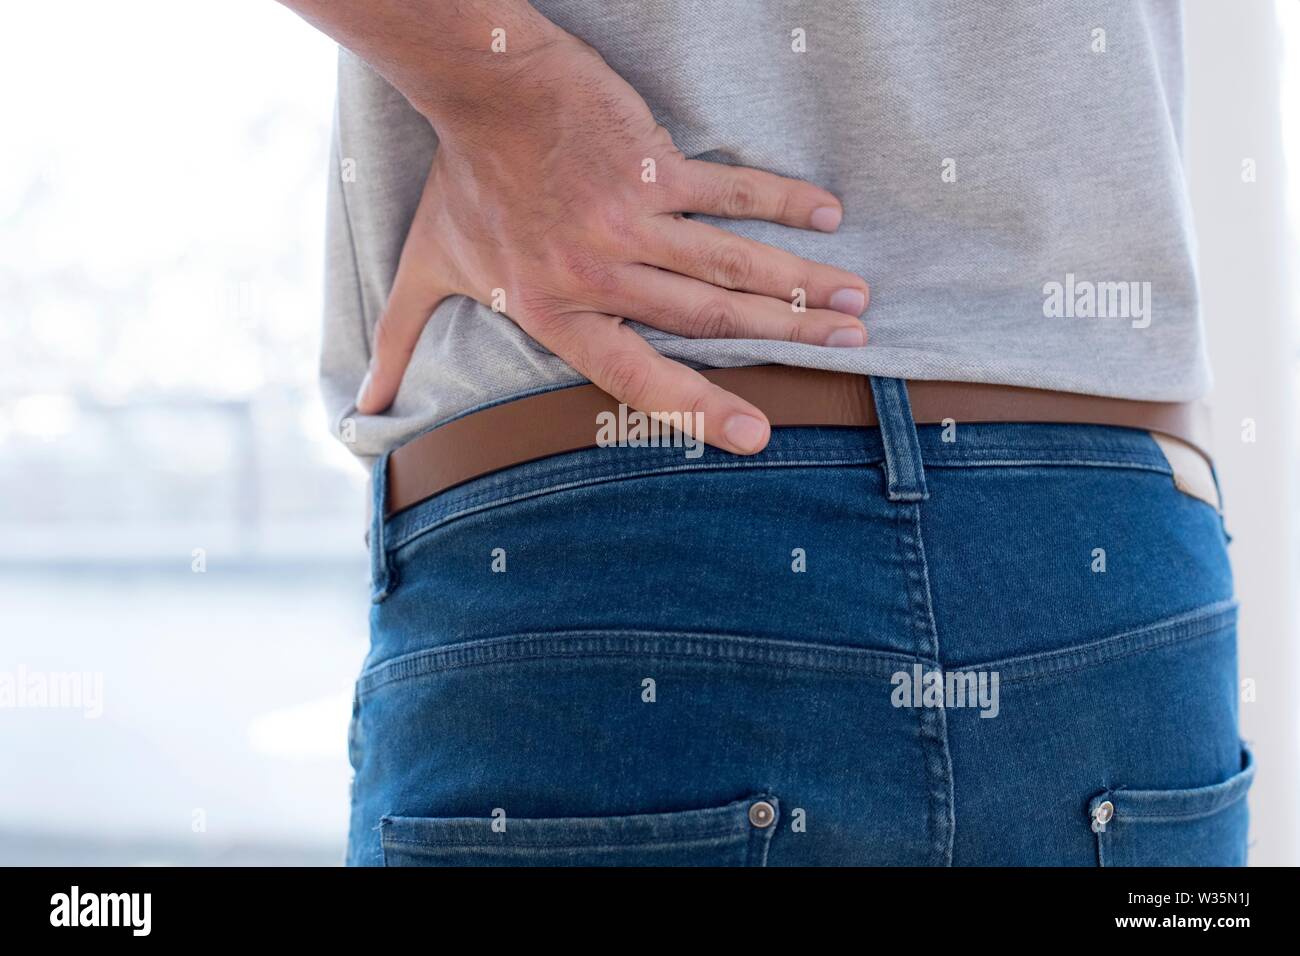 Man touching his back in pain. Stock Photo